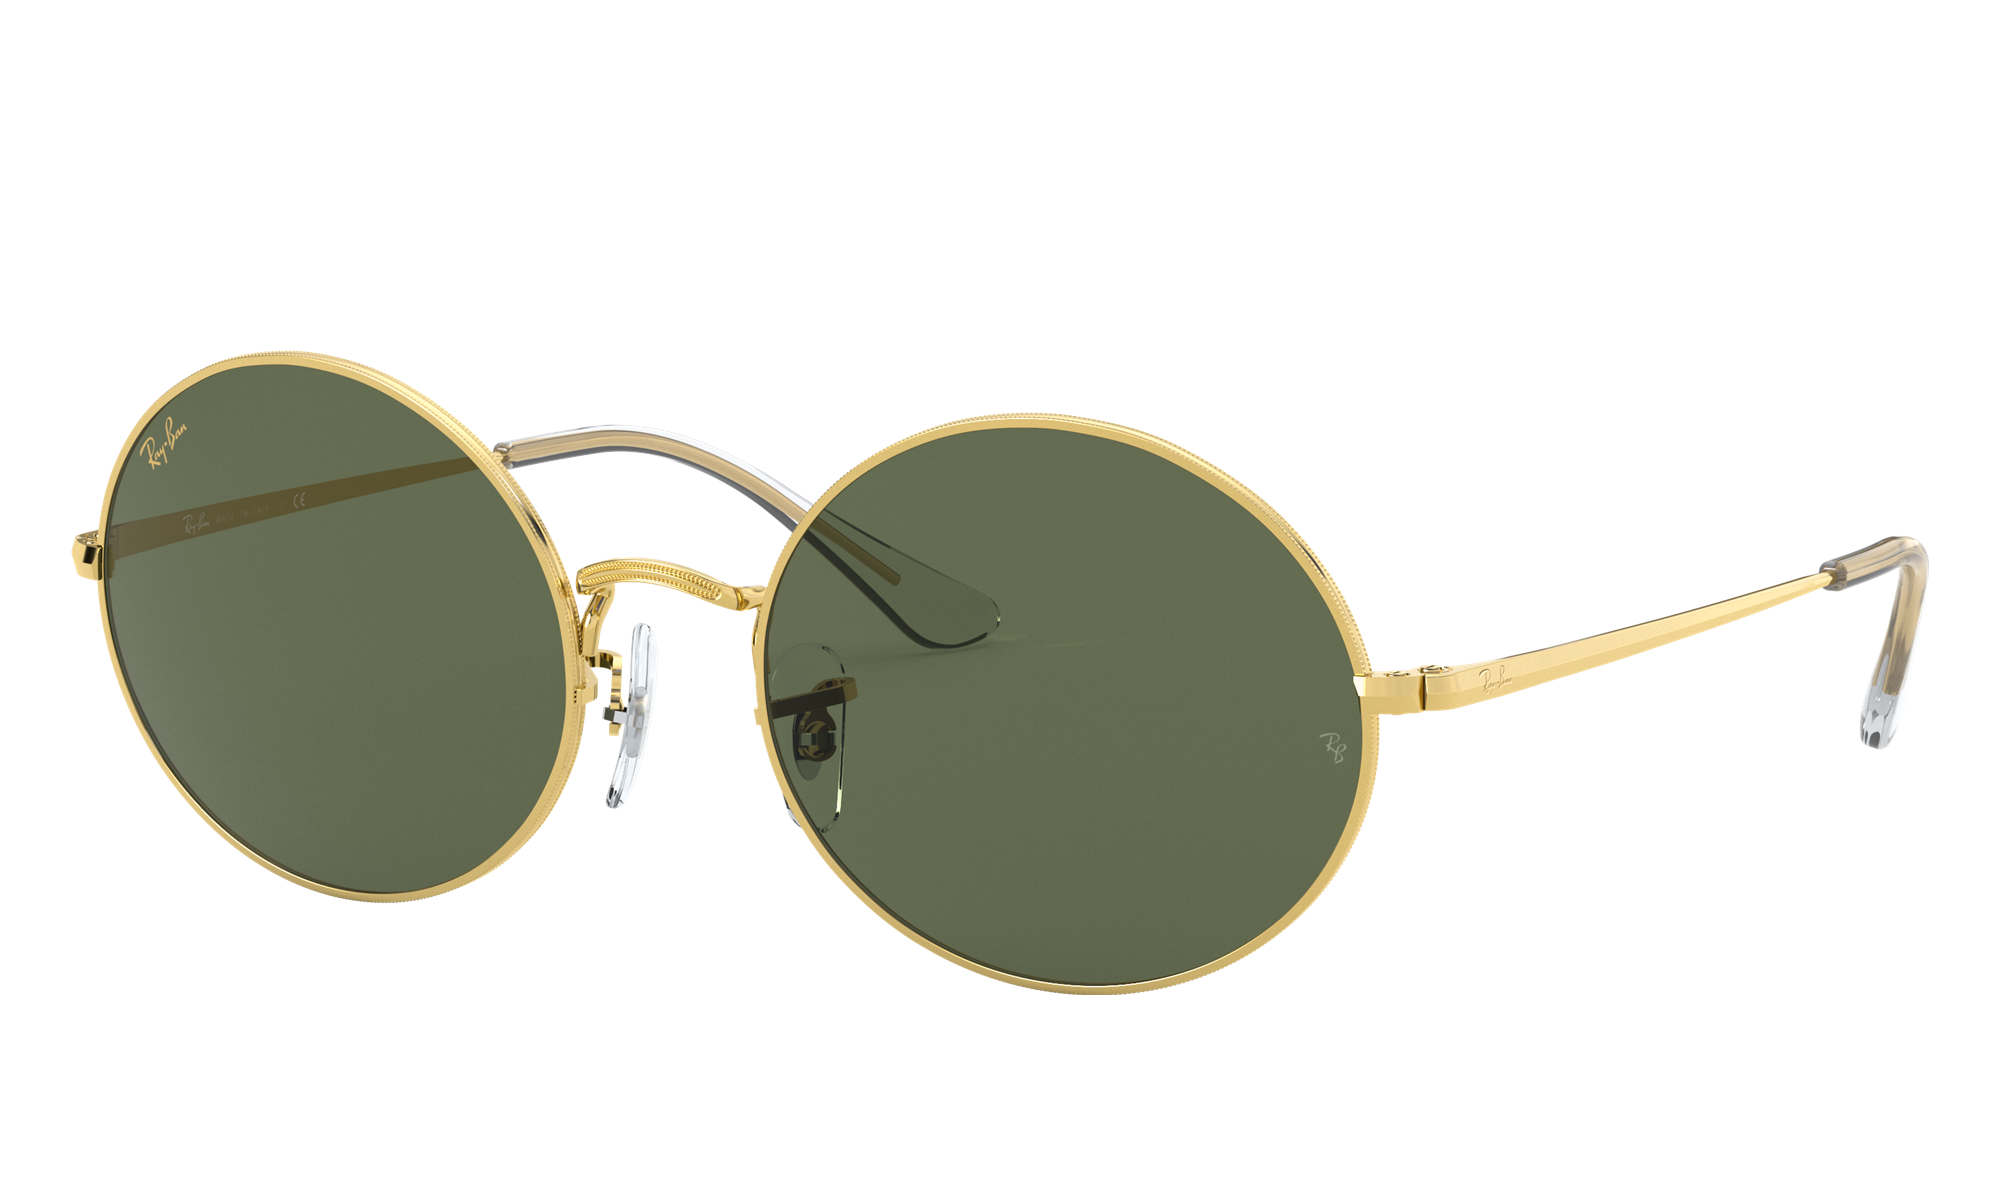 Ray-Ban Unisex Rb1970 Gold Size: Large